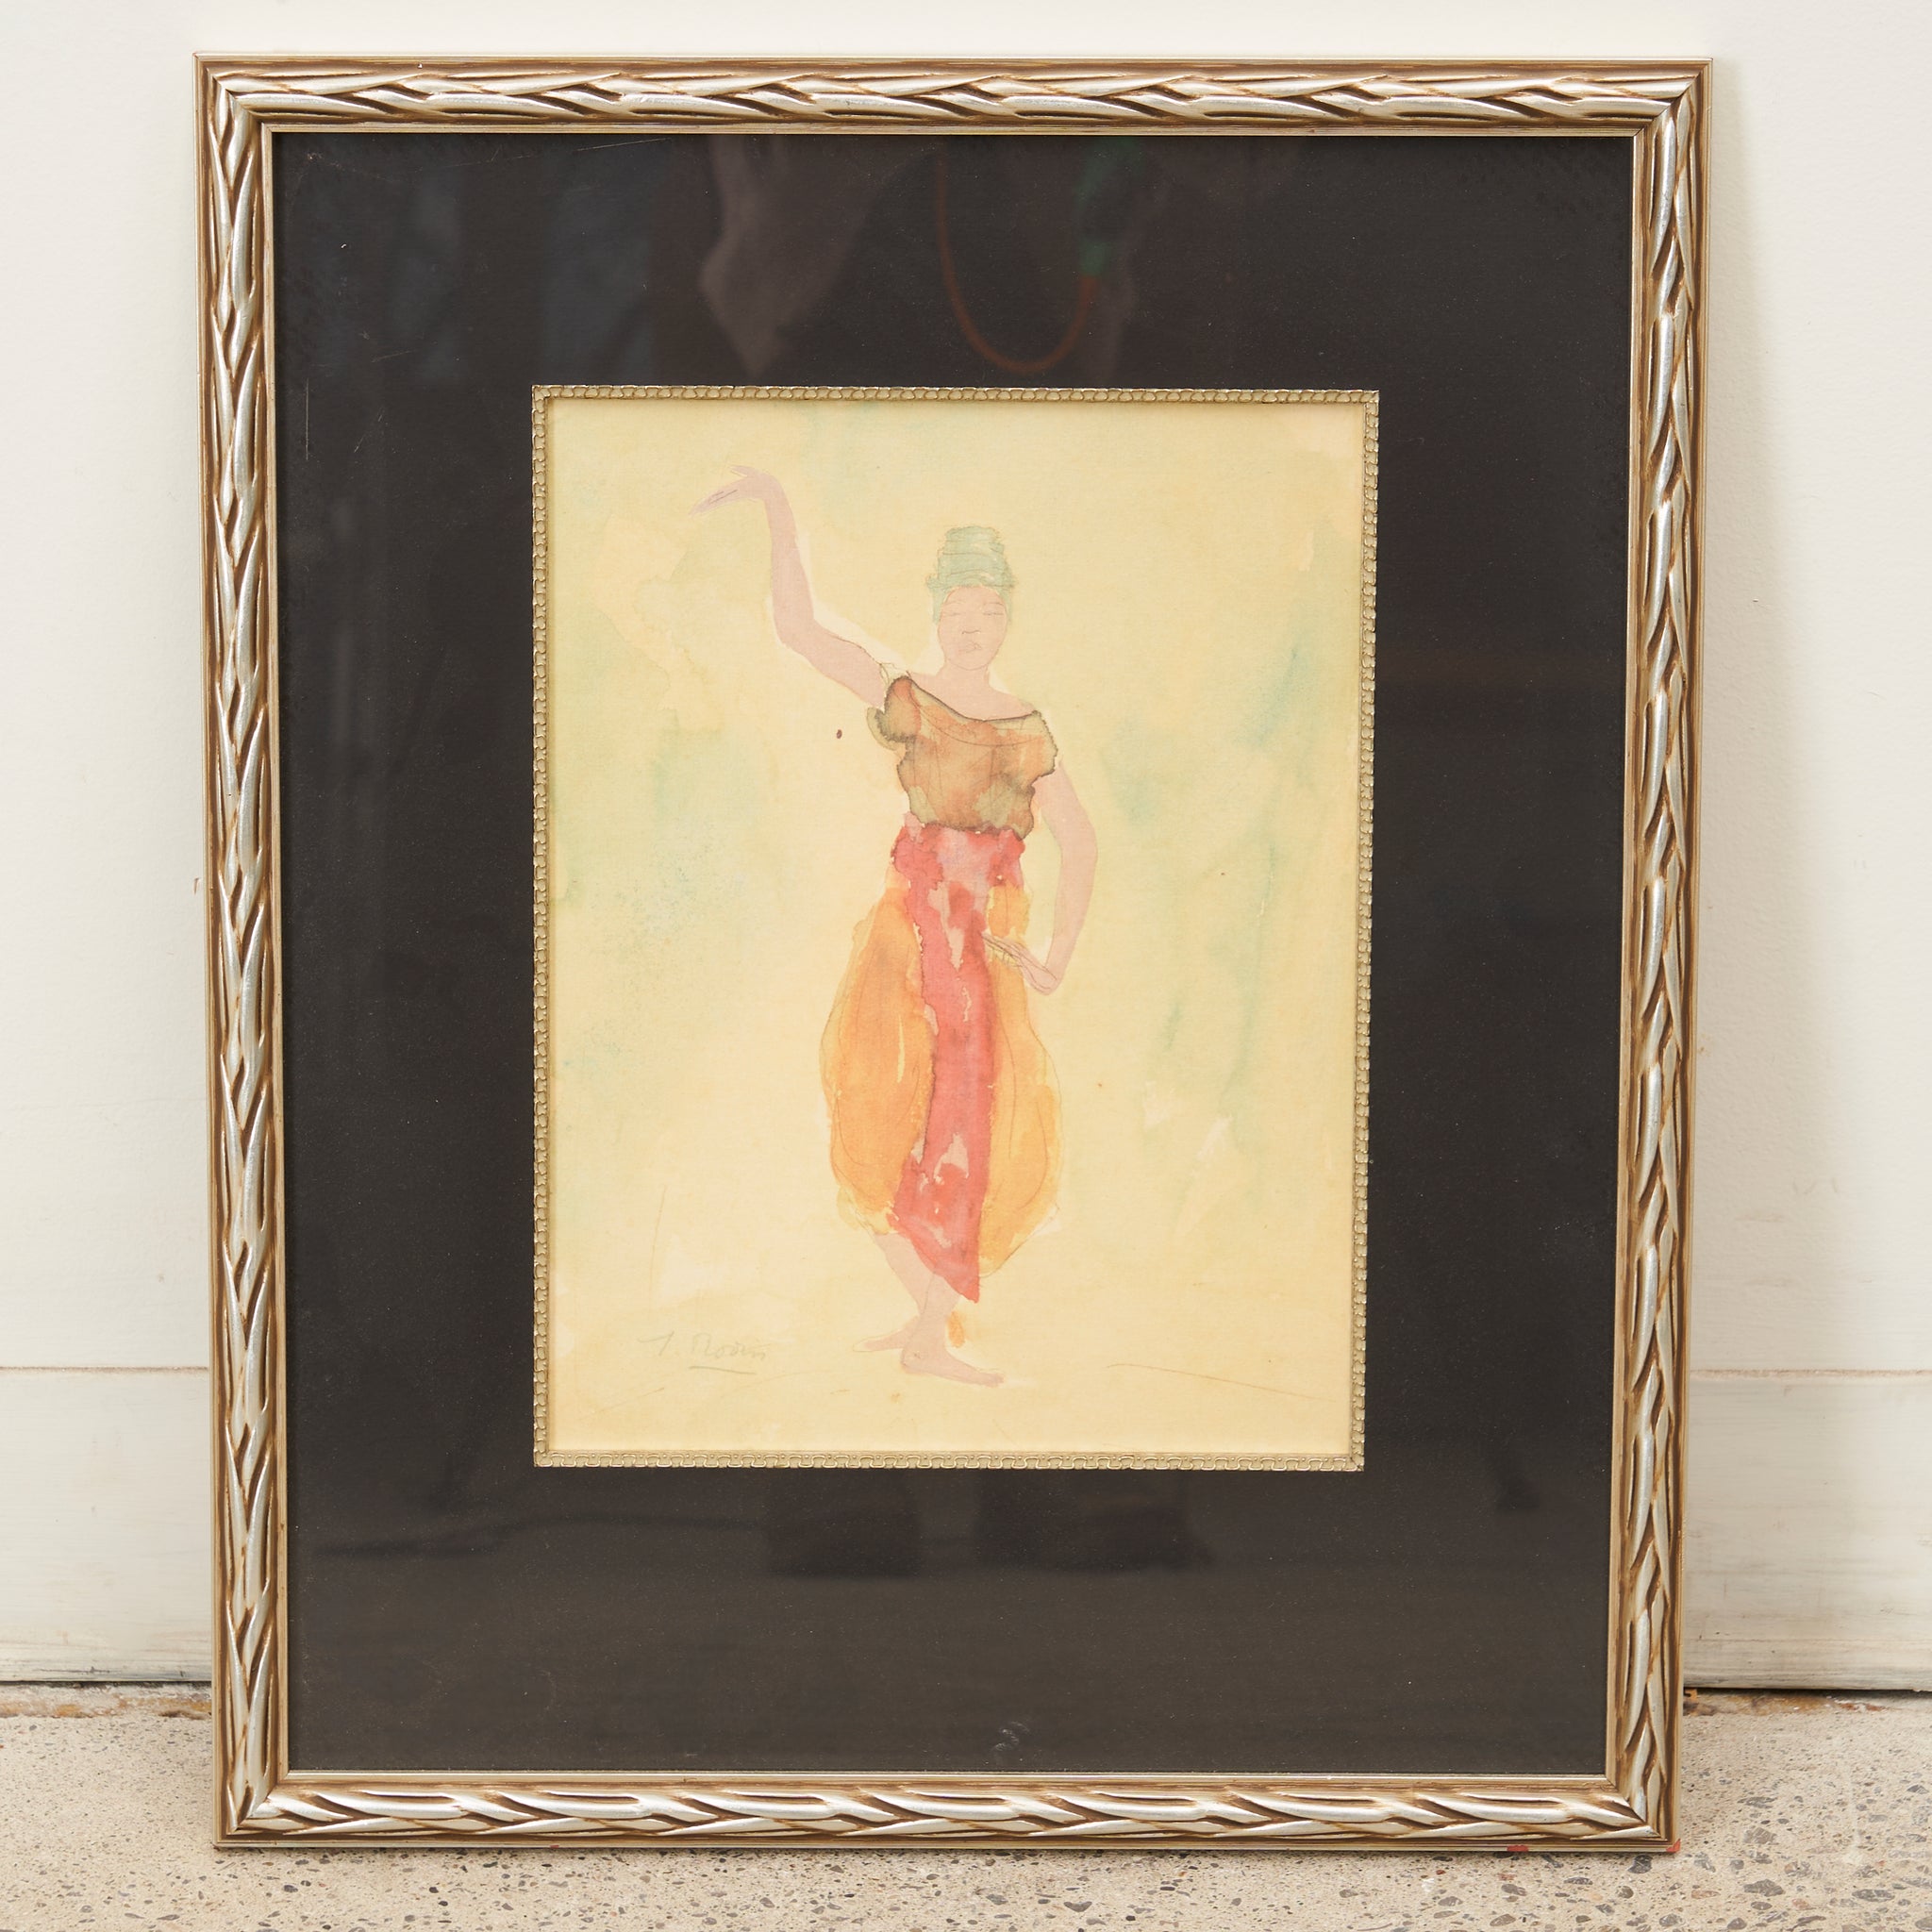 'Cambodian Dancer' Print by Auguste Rodin